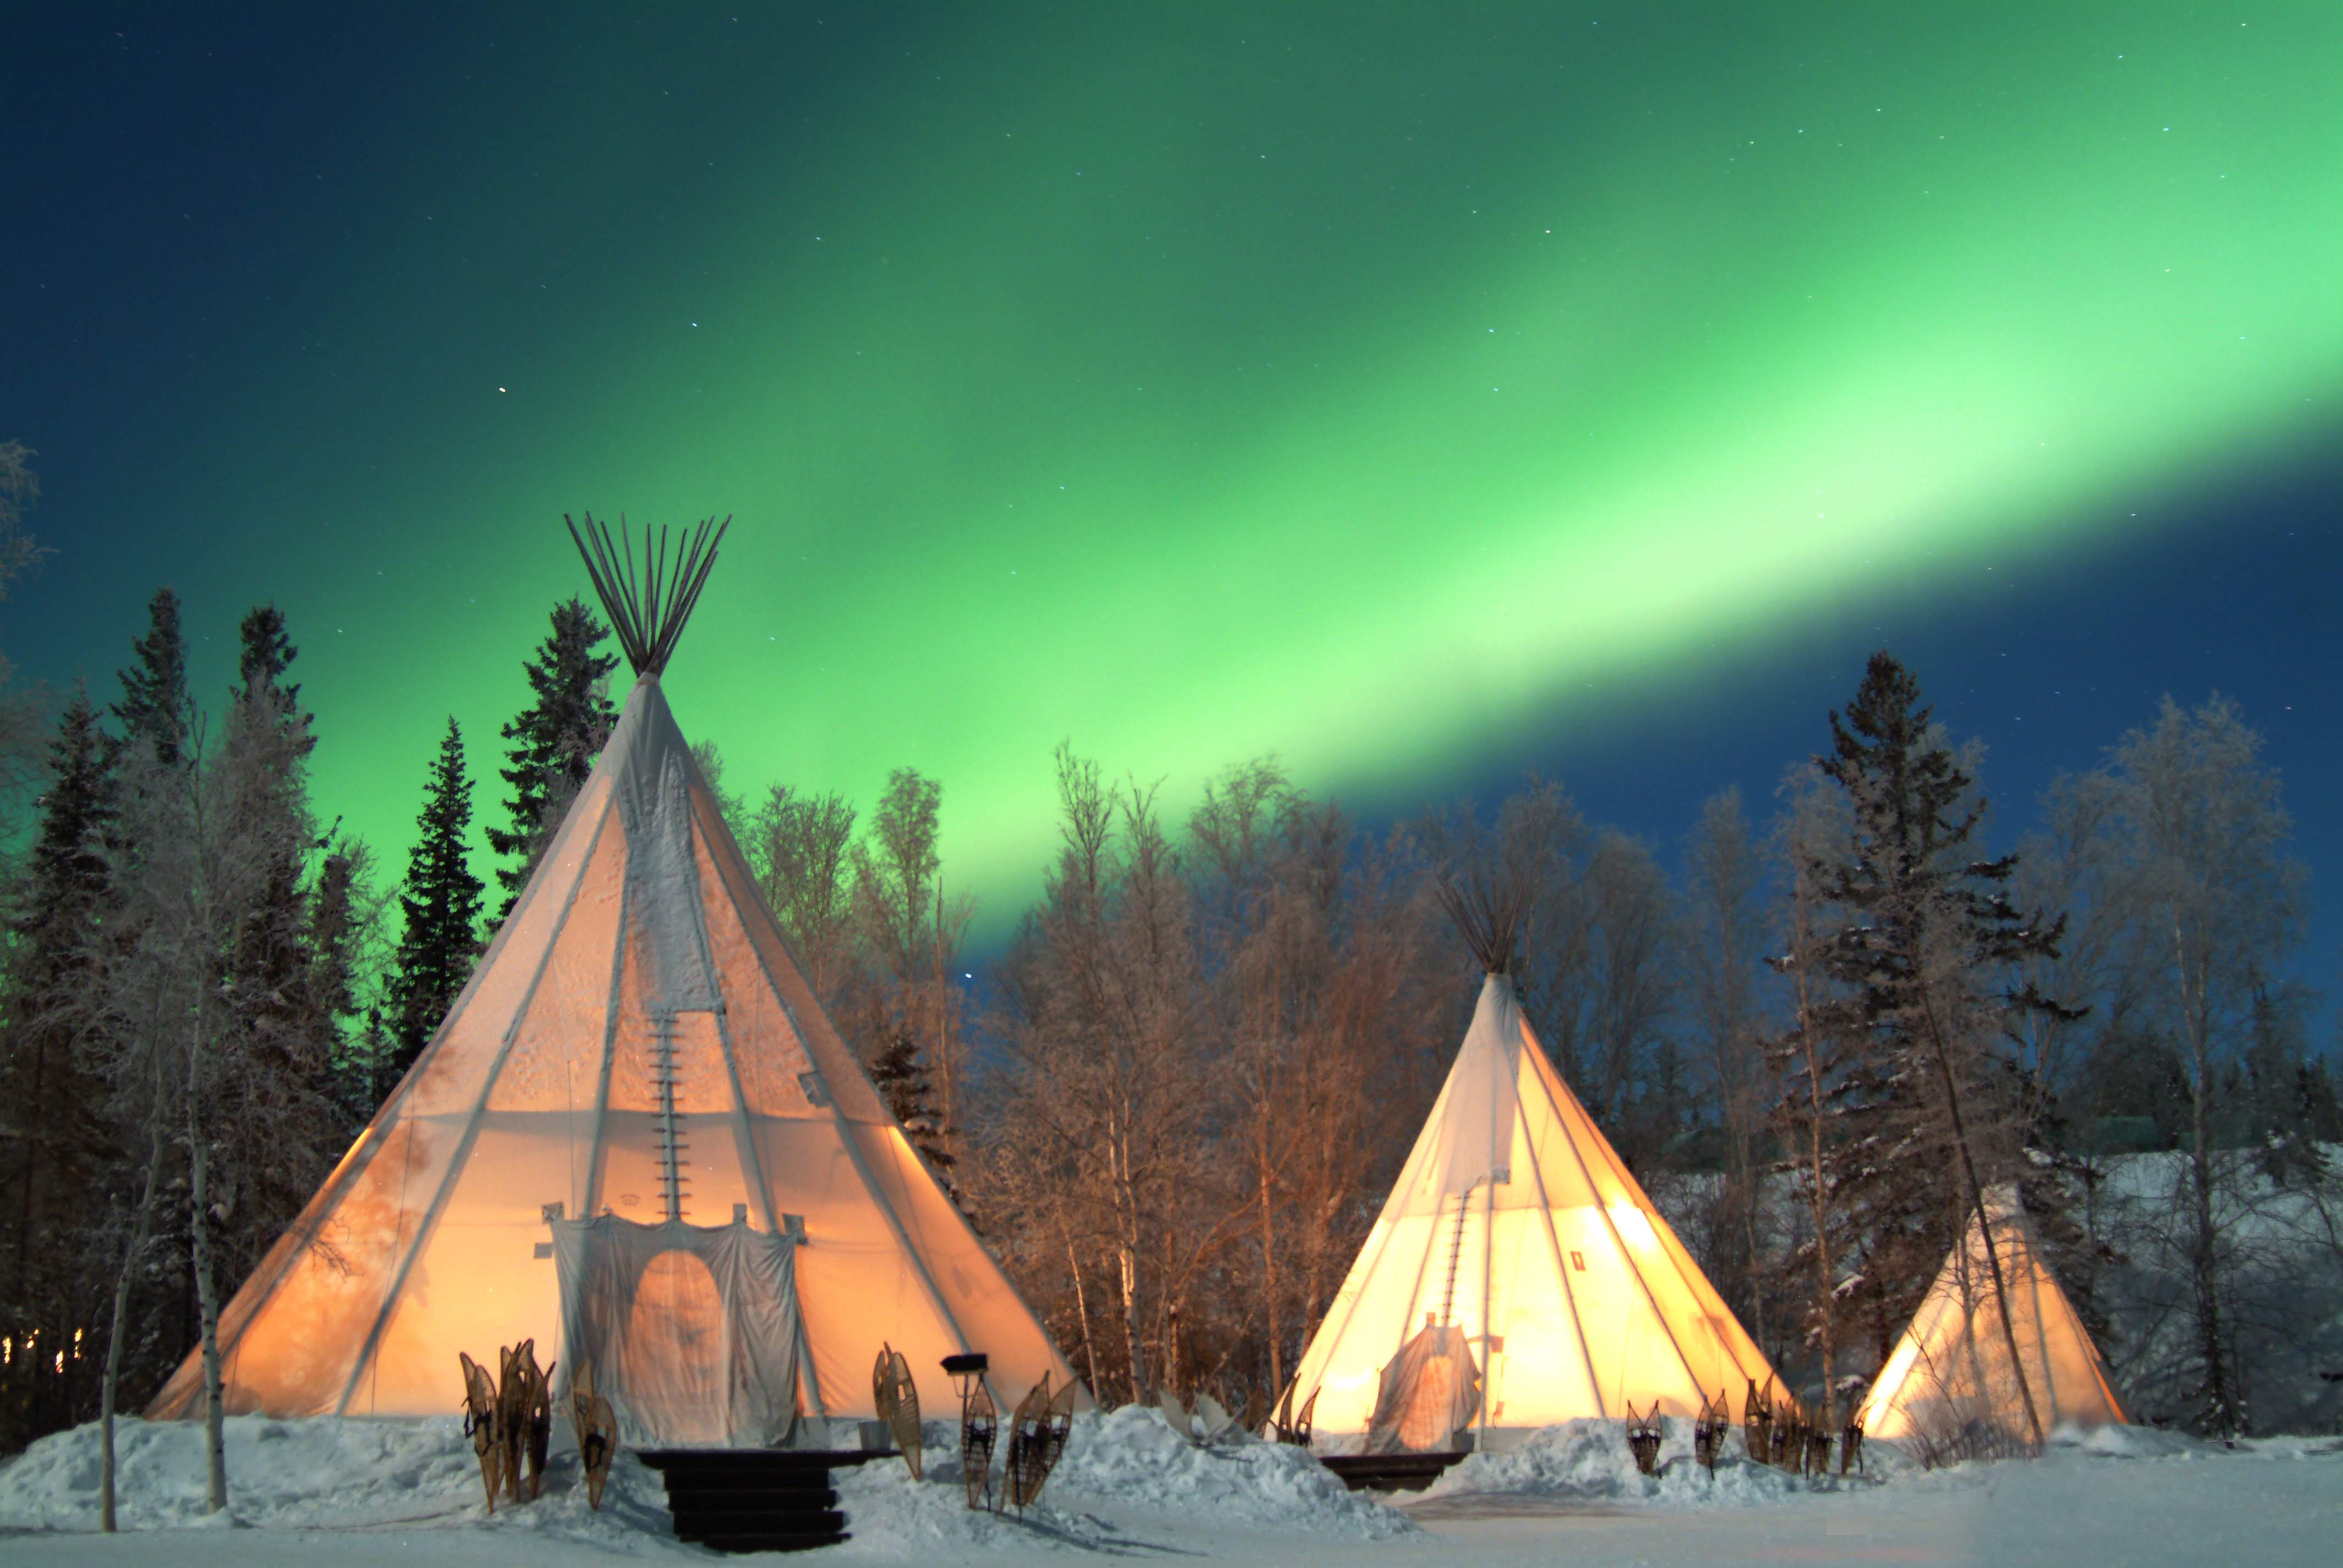 Seeing the Northern Lights in Finland – Best Time and Places